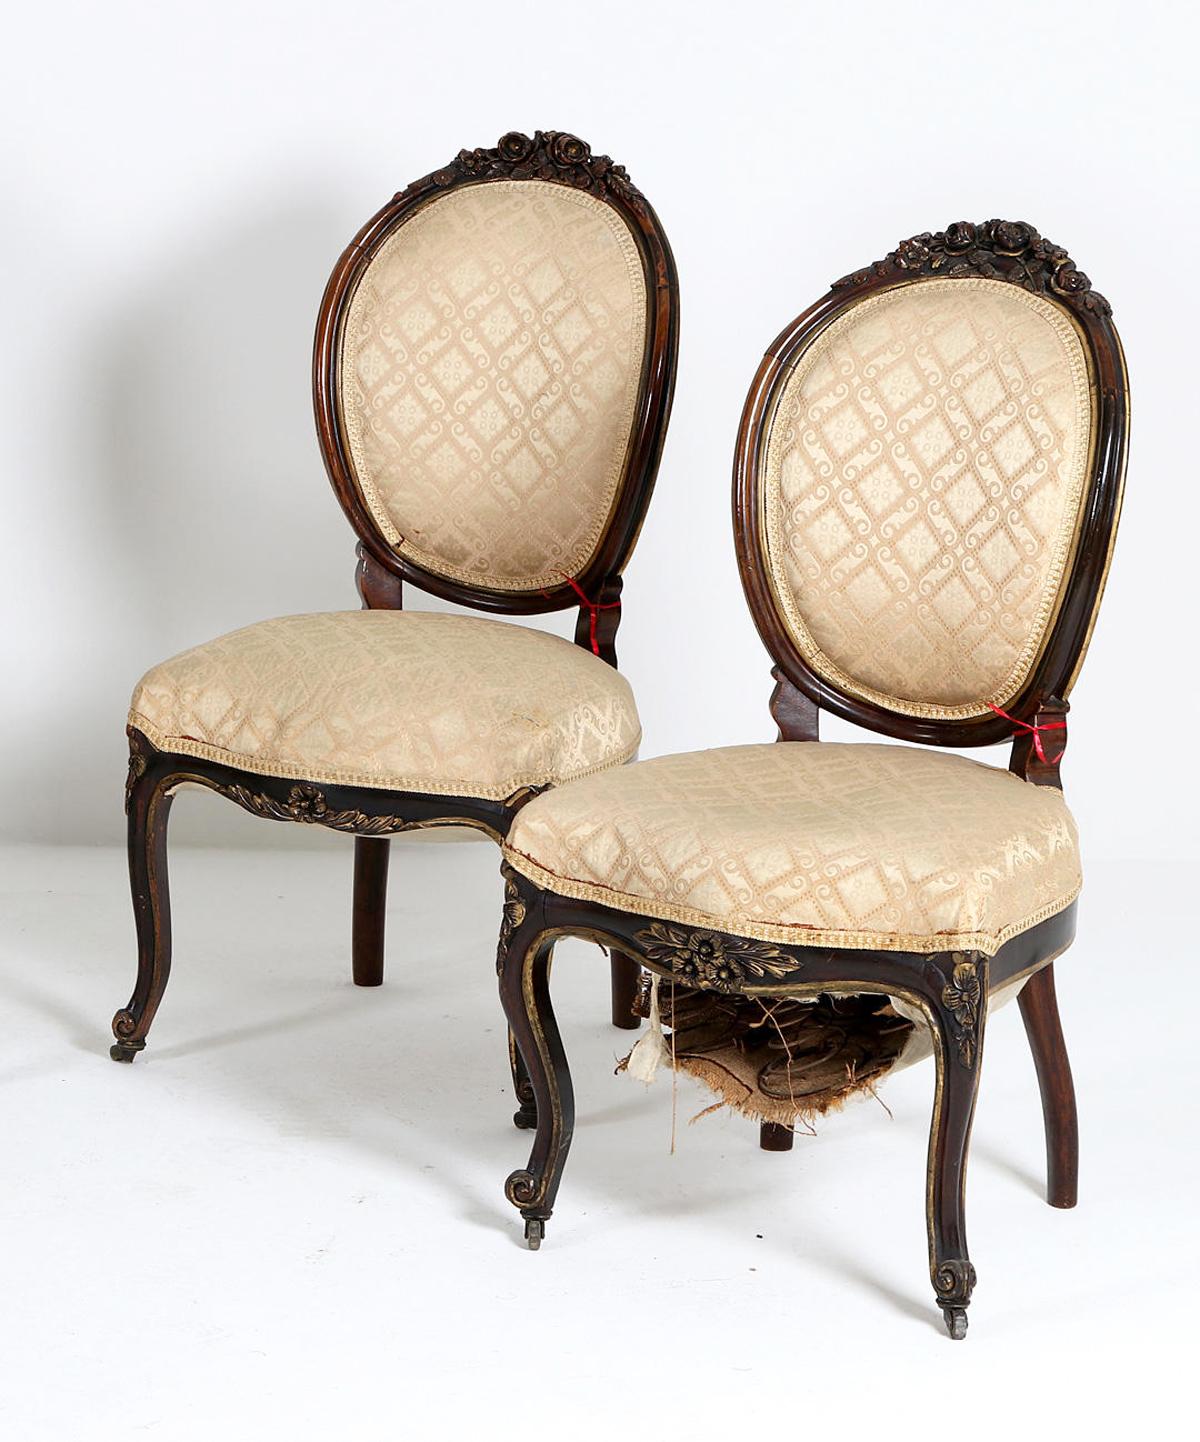 Gilt and bronzed hardwood frame. Nyrokoko, the second half of the 19th century. Repairs, marks. I offer also on request a professional complete restoration and new upholstery. (For example with le lievre or Tassinari fabrics).
Set of three